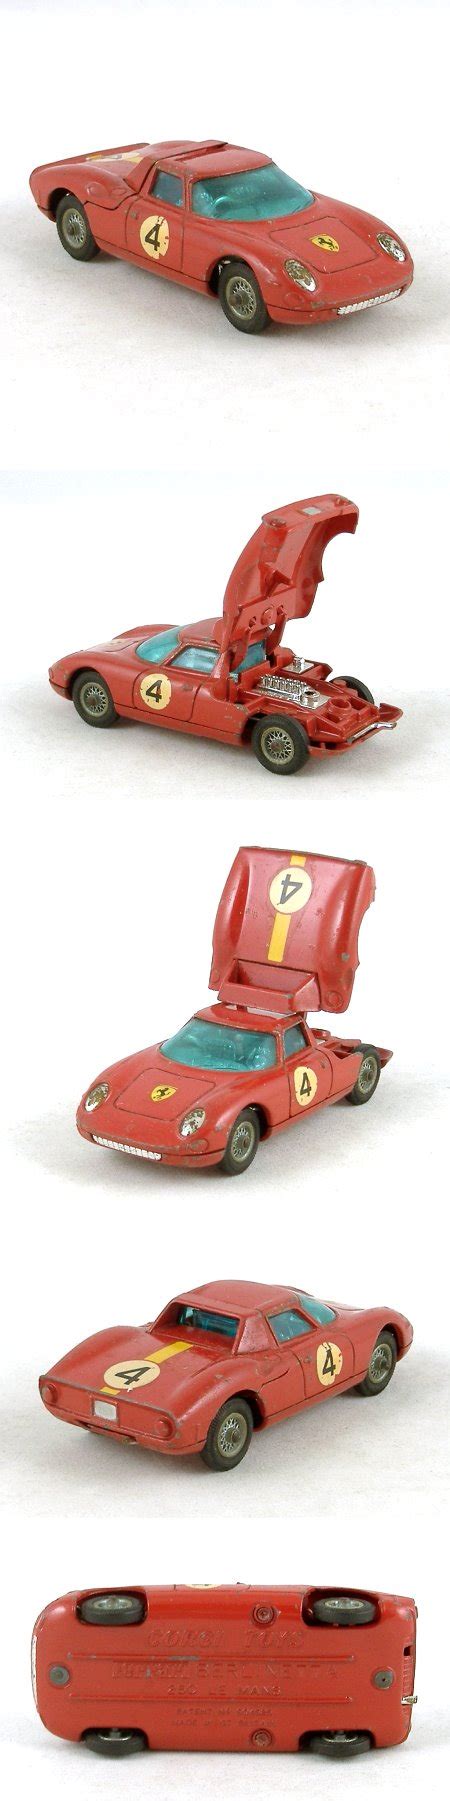 We stock a wide range of models such as corgi, dinky, spot on triang, lesney, schuco, which are listed and sold daily. 314 Ferrari Berlinetta 250 Le Mans | Ferrari berlinetta, Matchbox cars, Corgi toys